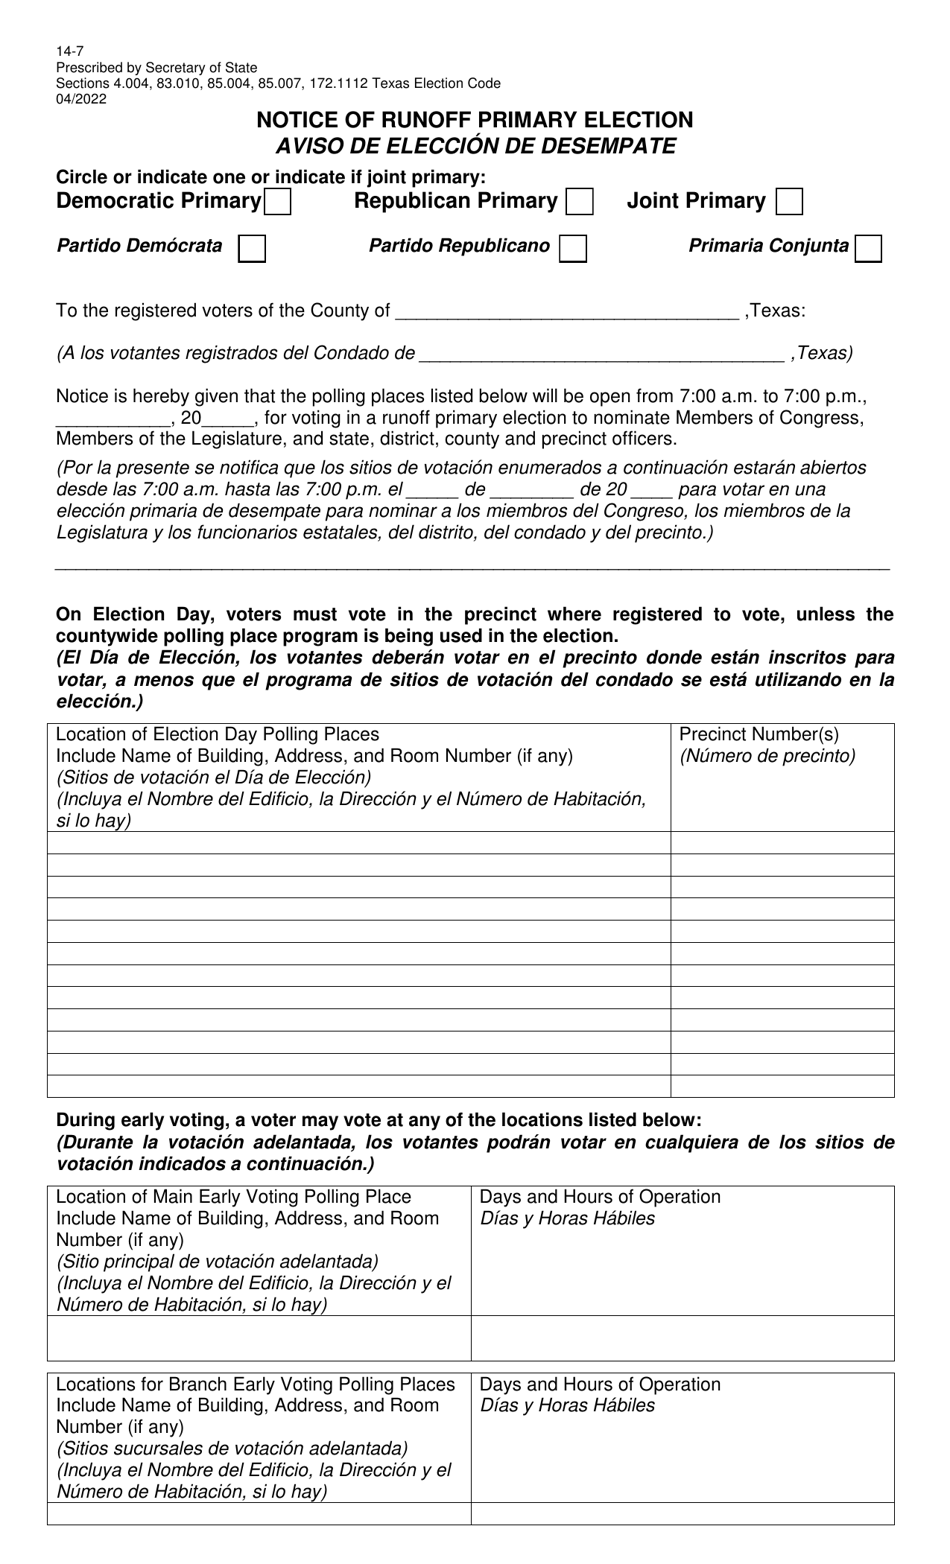 Form 14-7 Notice of Runoff Primary Election - Texas (English / Spanish), Page 1